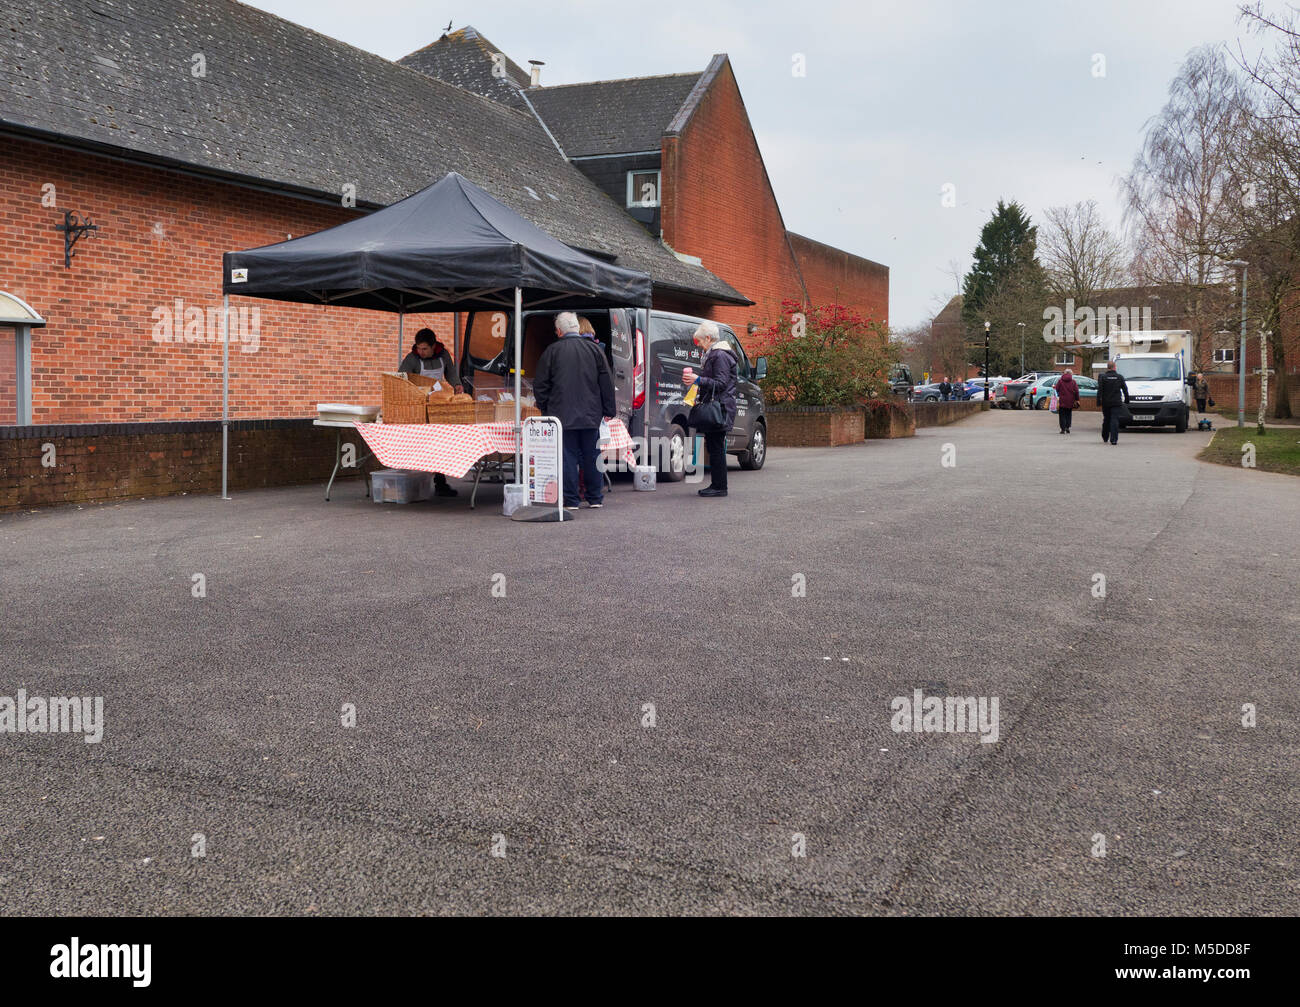 Ashbourne, Derbyshire, UK. 22nd February, 2018. Only two vendors attend the struggling Ashbourne, Derbyshire Thursday market after the Town Council decide to cut costs by not providing stalls for market traders. Ashbourne is the gateway to the Peak District National Park close to the Dovedale valley. Credit: Doug Blane/Alamy Live News Stock Photo